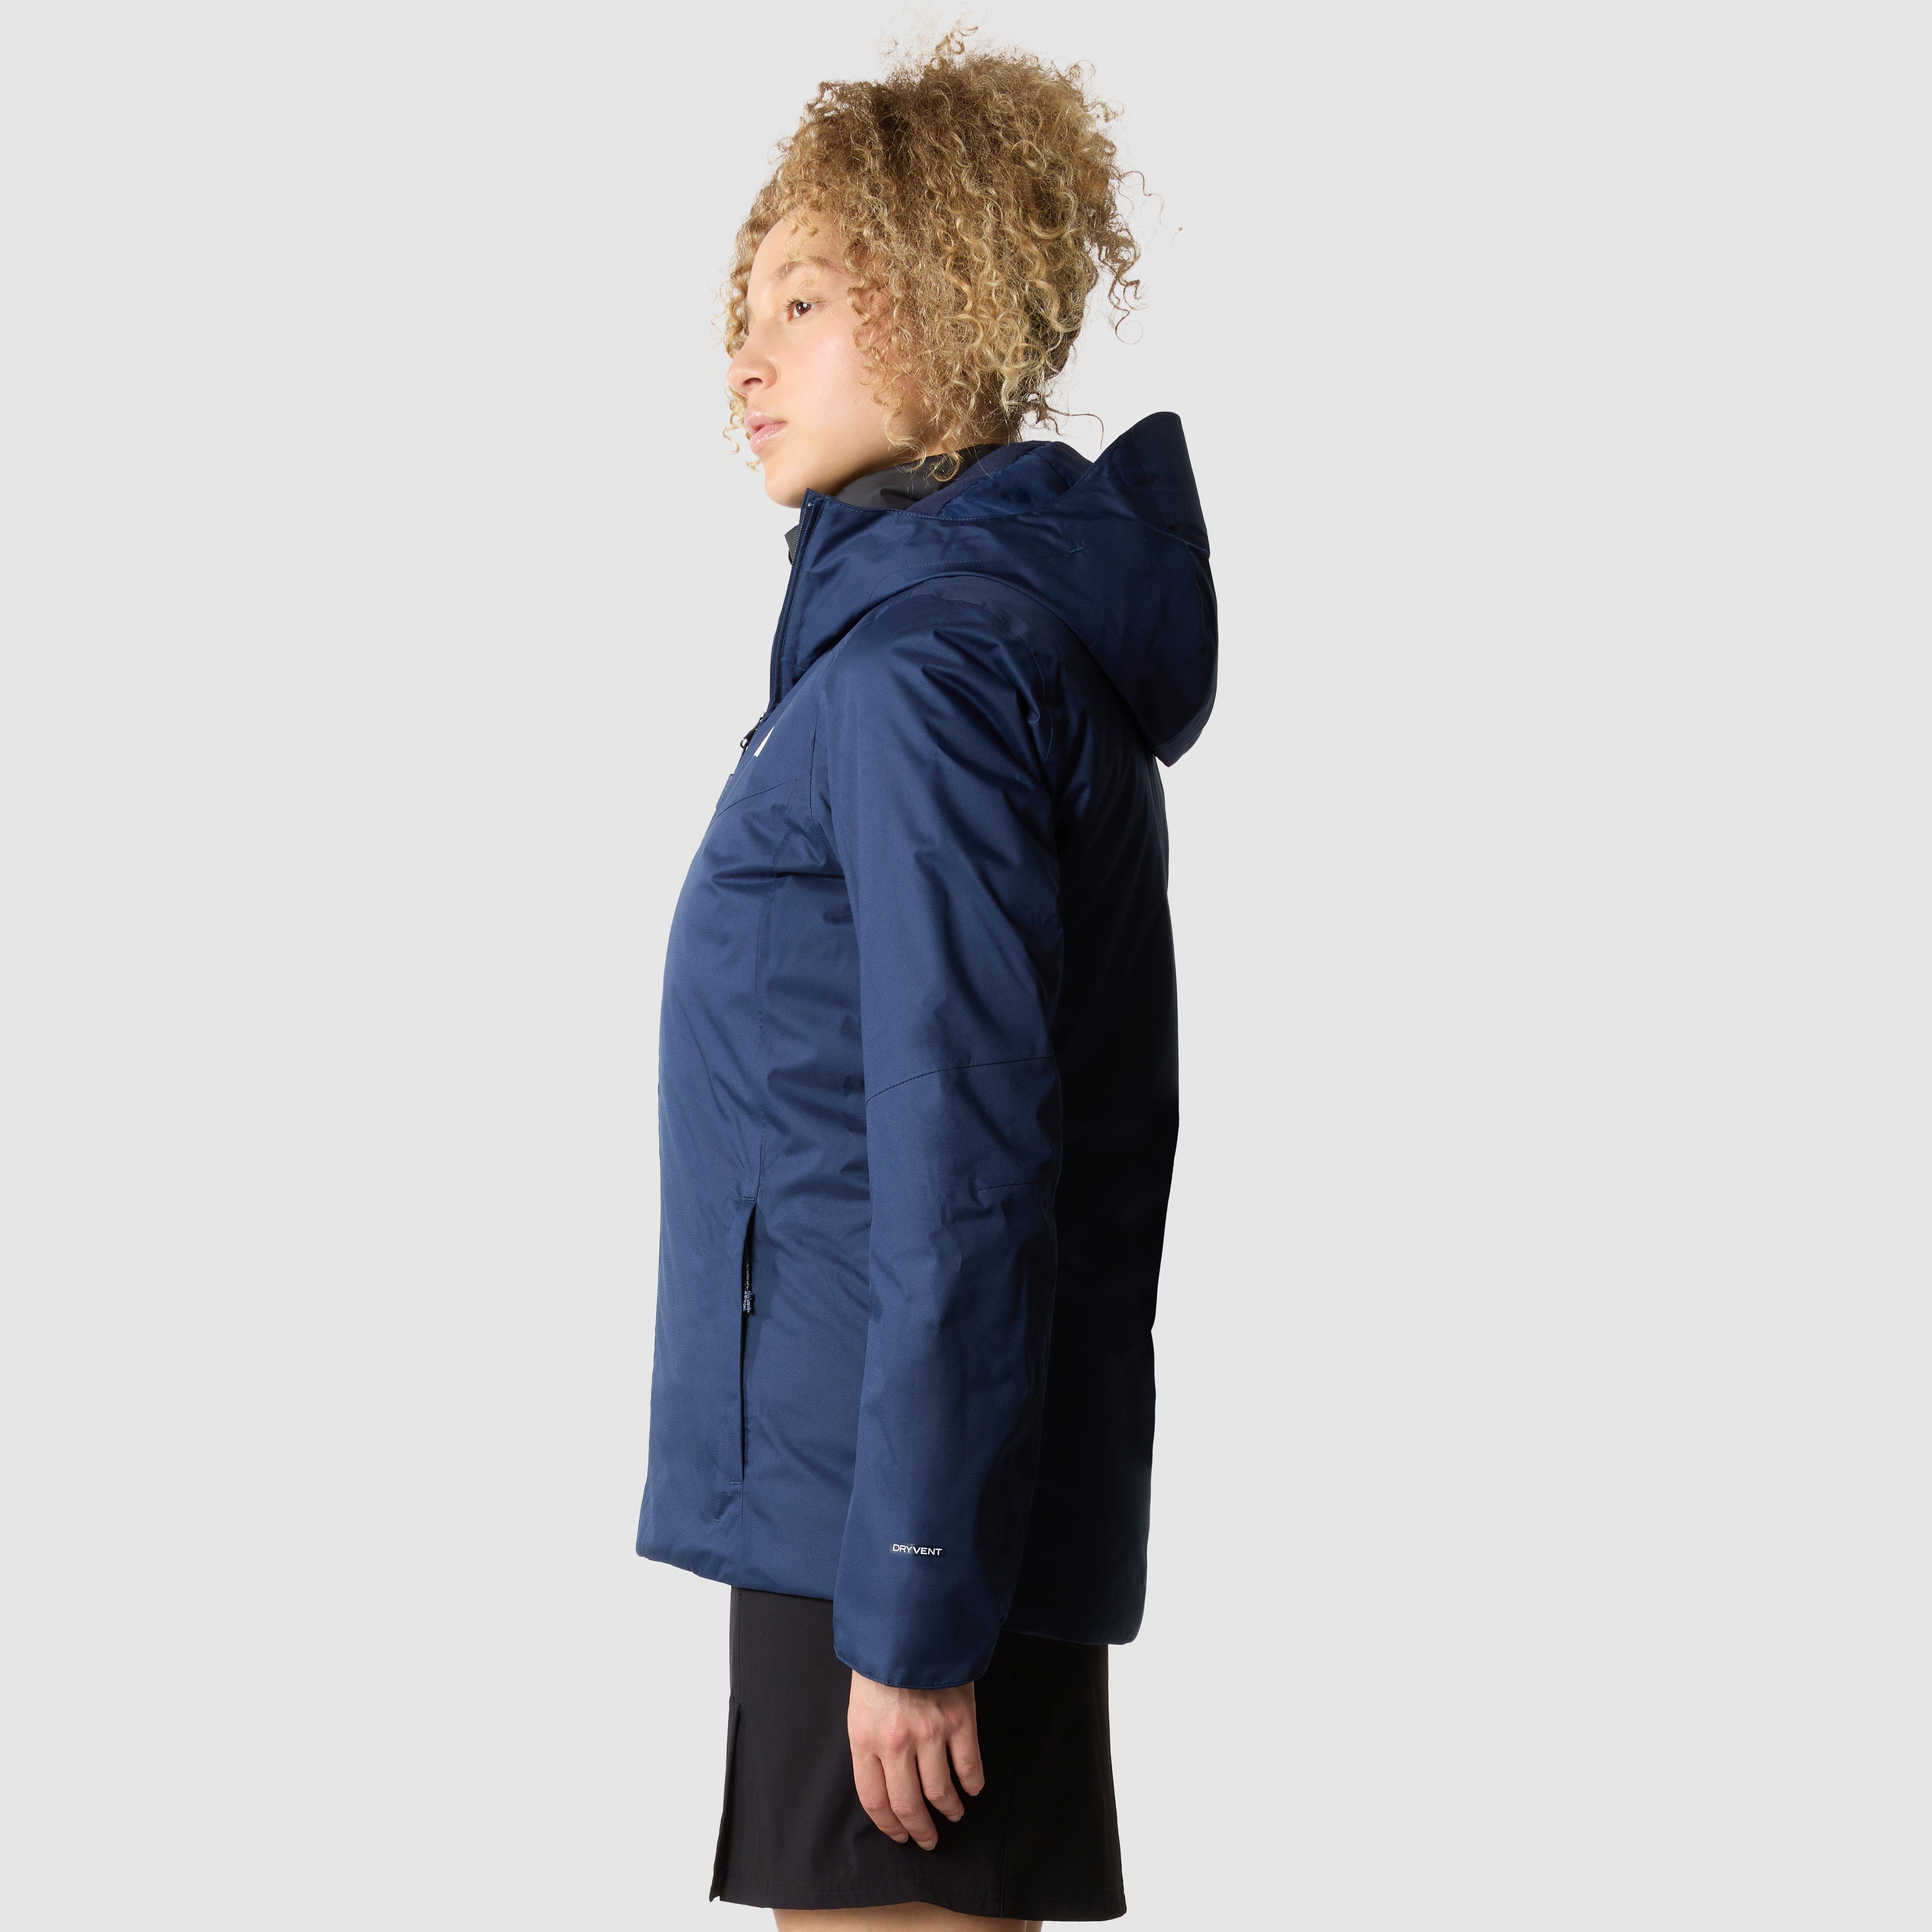 JACKET QUEST Face Logodruck W INSULATED Funktionsjacke The mit North